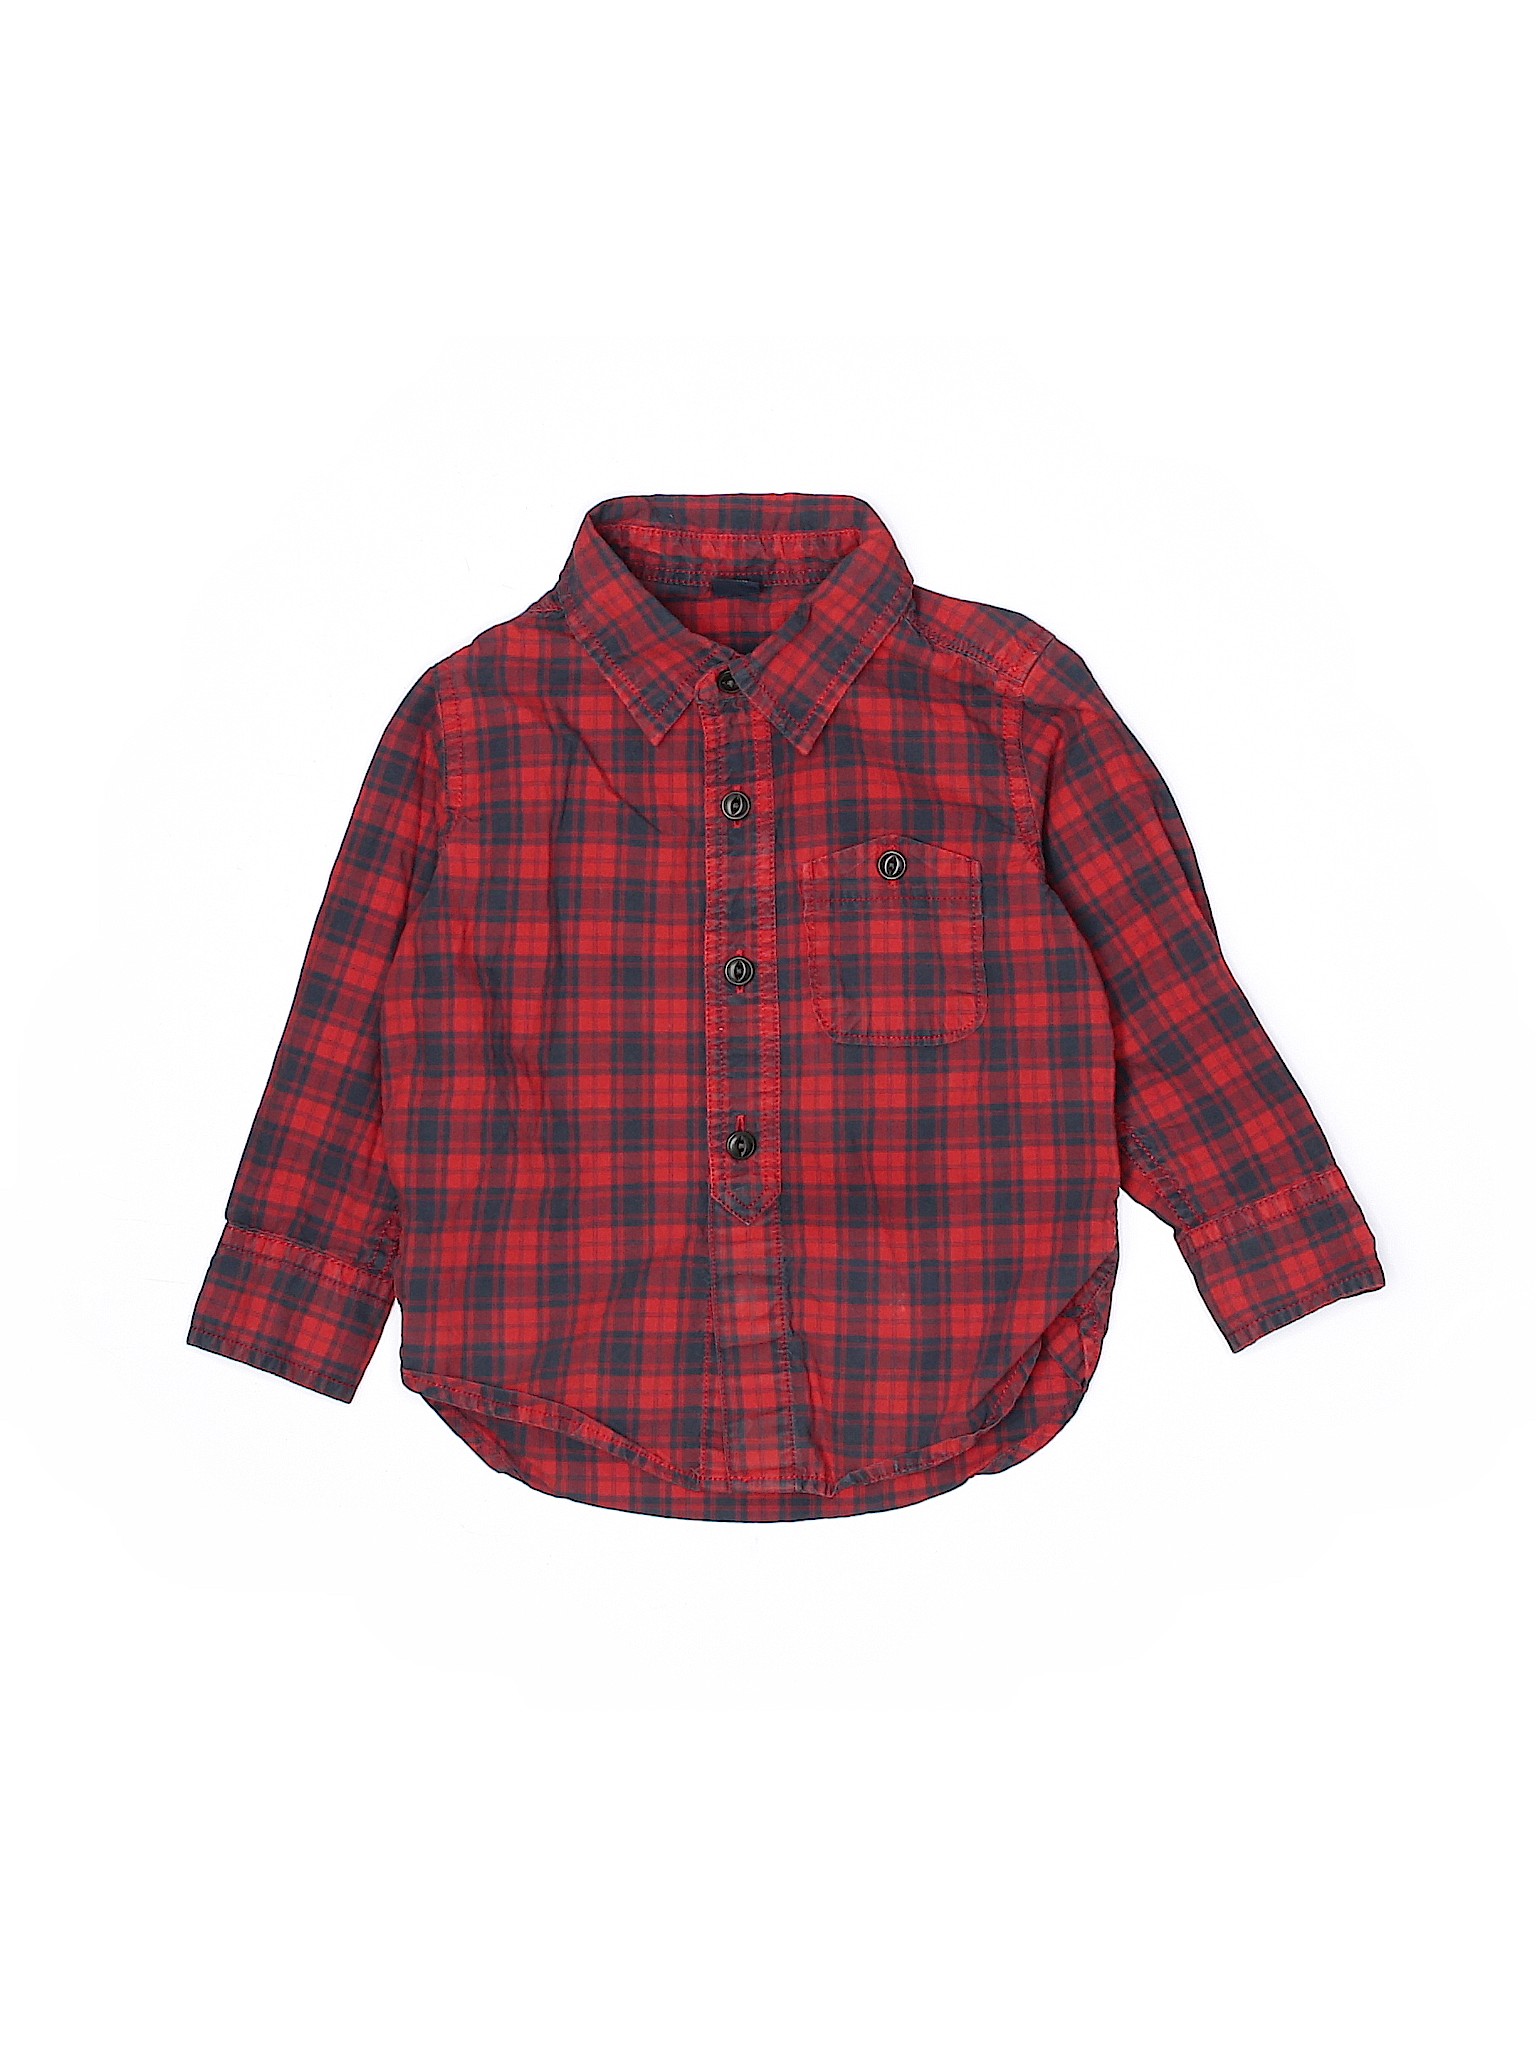 baby boy red button down shirt